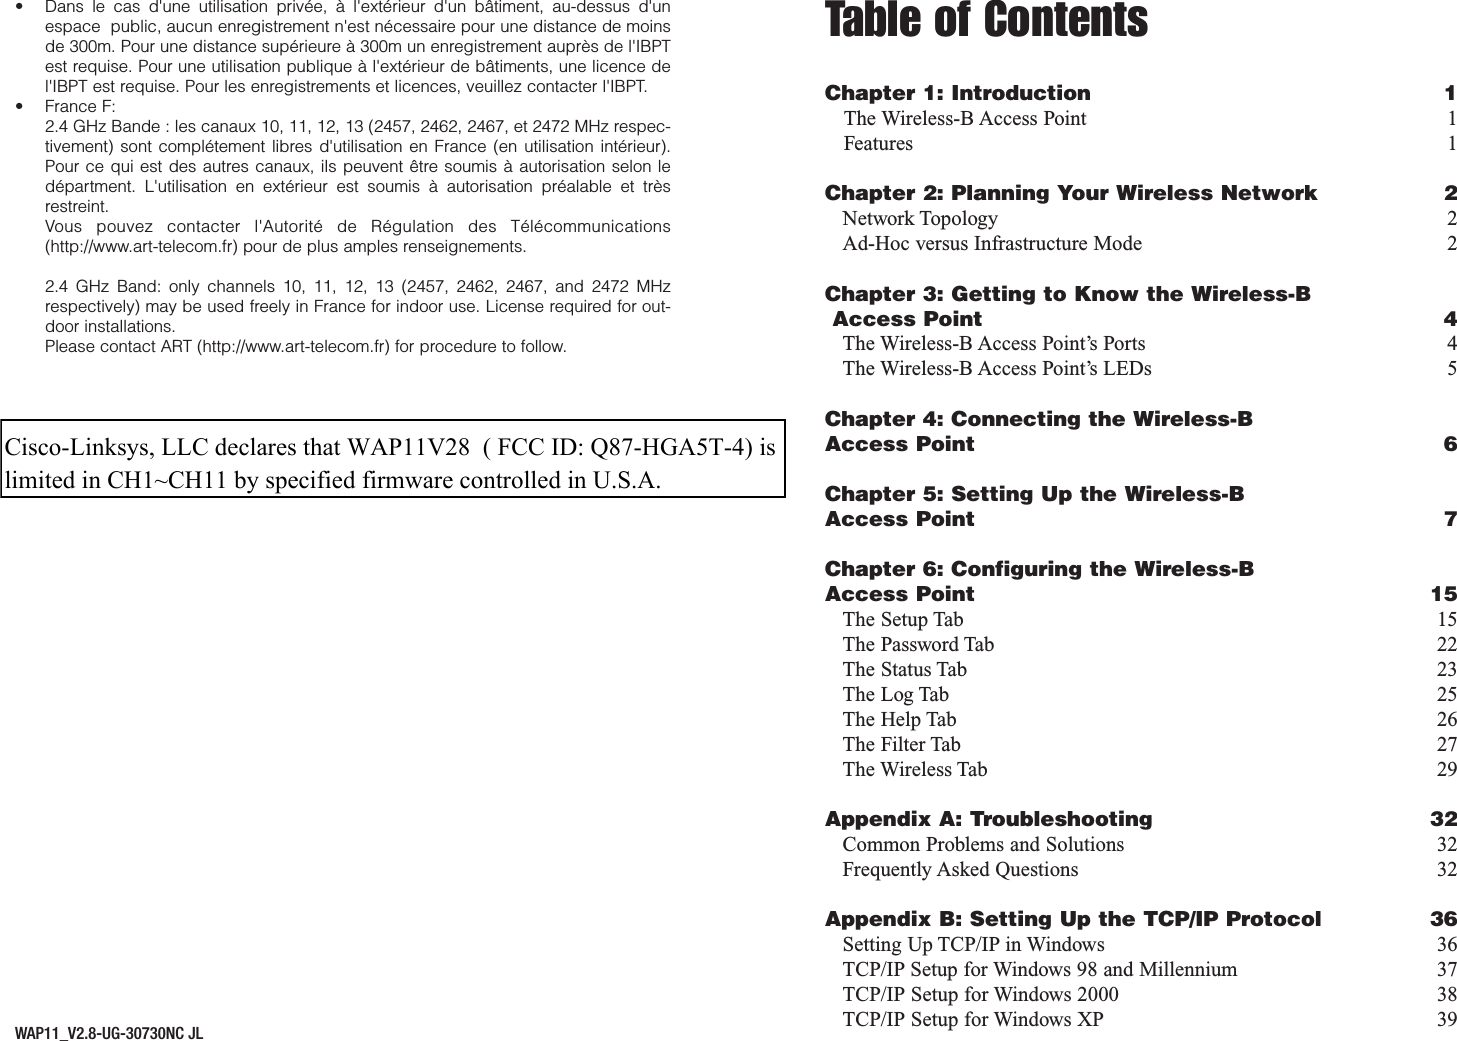 Table of ContentsChapter 1: Introduction 1The Wireless-B Access Point 1Features 1Chapter 2: Planning Your Wireless Network 2Network Topology 2Ad-Hoc versus Infrastructure Mode 2Chapter 3: Getting to Know the Wireless-BAccess Point 4The Wireless-B Access Point’s Ports 4The Wireless-B Access Point’s LEDs 5Chapter 4: Connecting the Wireless-B Access Point 6Chapter 5: Setting Up the Wireless-B Access Point 7Chapter 6: Configuring the Wireless-BAccess Point 15The Setup Tab 15The Password Tab 22The Status Tab 23The Log Tab 25The Help Tab 26The Filter Tab 27The Wireless Tab 29Appendix A: Troubleshooting 32Common Problems and Solutions 32Frequently Asked Questions 32Appendix B: Setting Up the TCP/IP Protocol 36Setting Up TCP/IP in Windows 36TCP/IP Setup for Windows 98 and Millennium 37TCP/IP Setup for Windows 2000 38TCP/IP Setup for Windows XP 39• Dans le cas d&apos;une utilisation privée, à l&apos;extérieur d&apos;un bâtiment, au-dessus d&apos;unespace  public, aucun enregistrement n&apos;est nécessaire pour une distance de moinsde 300m. Pour une distance supérieure à 300m un enregistrement auprès de l&apos;IBPTest requise. Pour une utilisation publique à l&apos;extérieur de bâtiments, une licence del&apos;IBPT est requise. Pour les enregistrements et licences, veuillez contacter l&apos;IBPT.• France F: 2.4 GHz Bande : les canaux 10, 11, 12, 13 (2457, 2462, 2467, et 2472 MHz respec-tivement) sont complétement libres d&apos;utilisation en France (en utilisation intérieur).Pour ce qui est des autres canaux, ils peuvent être soumis à autorisation selon ledépartment. L&apos;utilisation en extérieur est soumis à autorisation préalable et trèsrestreint. Vous pouvez contacter l&apos;Autorité de Régulation des Télécommunications(http://www.art-telecom.fr) pour de plus amples renseignements.2.4 GHz Band: only channels 10, 11, 12, 13 (2457, 2462, 2467, and 2472 MHzrespectively) may be used freely in France for indoor use. License required for out-door installations.Please contact ART (http://www.art-telecom.fr) for procedure to follow.WAP11_V2.8-UG-30730NC JLCisco-Linksys, LLC declares that WAP11V28  ( FCC ID: Q87-HGA5T-4) is limited in CH1~CH11 by specified firmware controlled in U.S.A. 